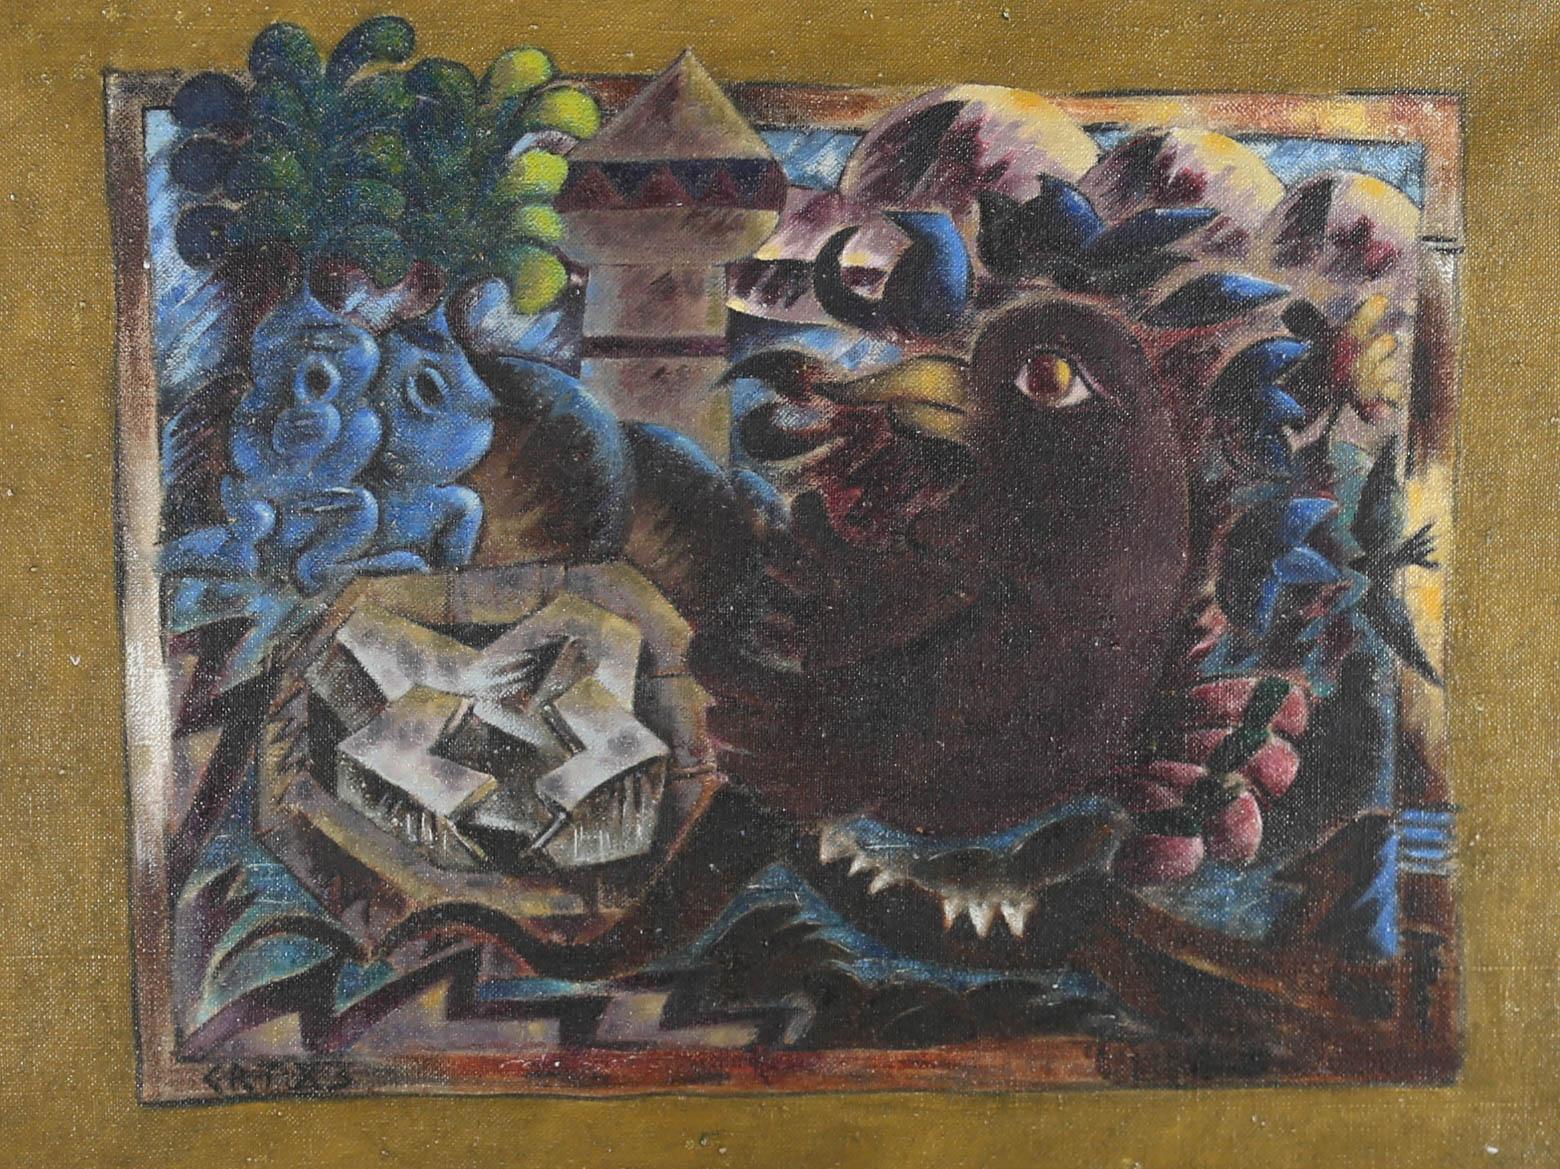 C. R. T. - 1983 Oil, Black Bird On The City Walls - Painting by Unknown